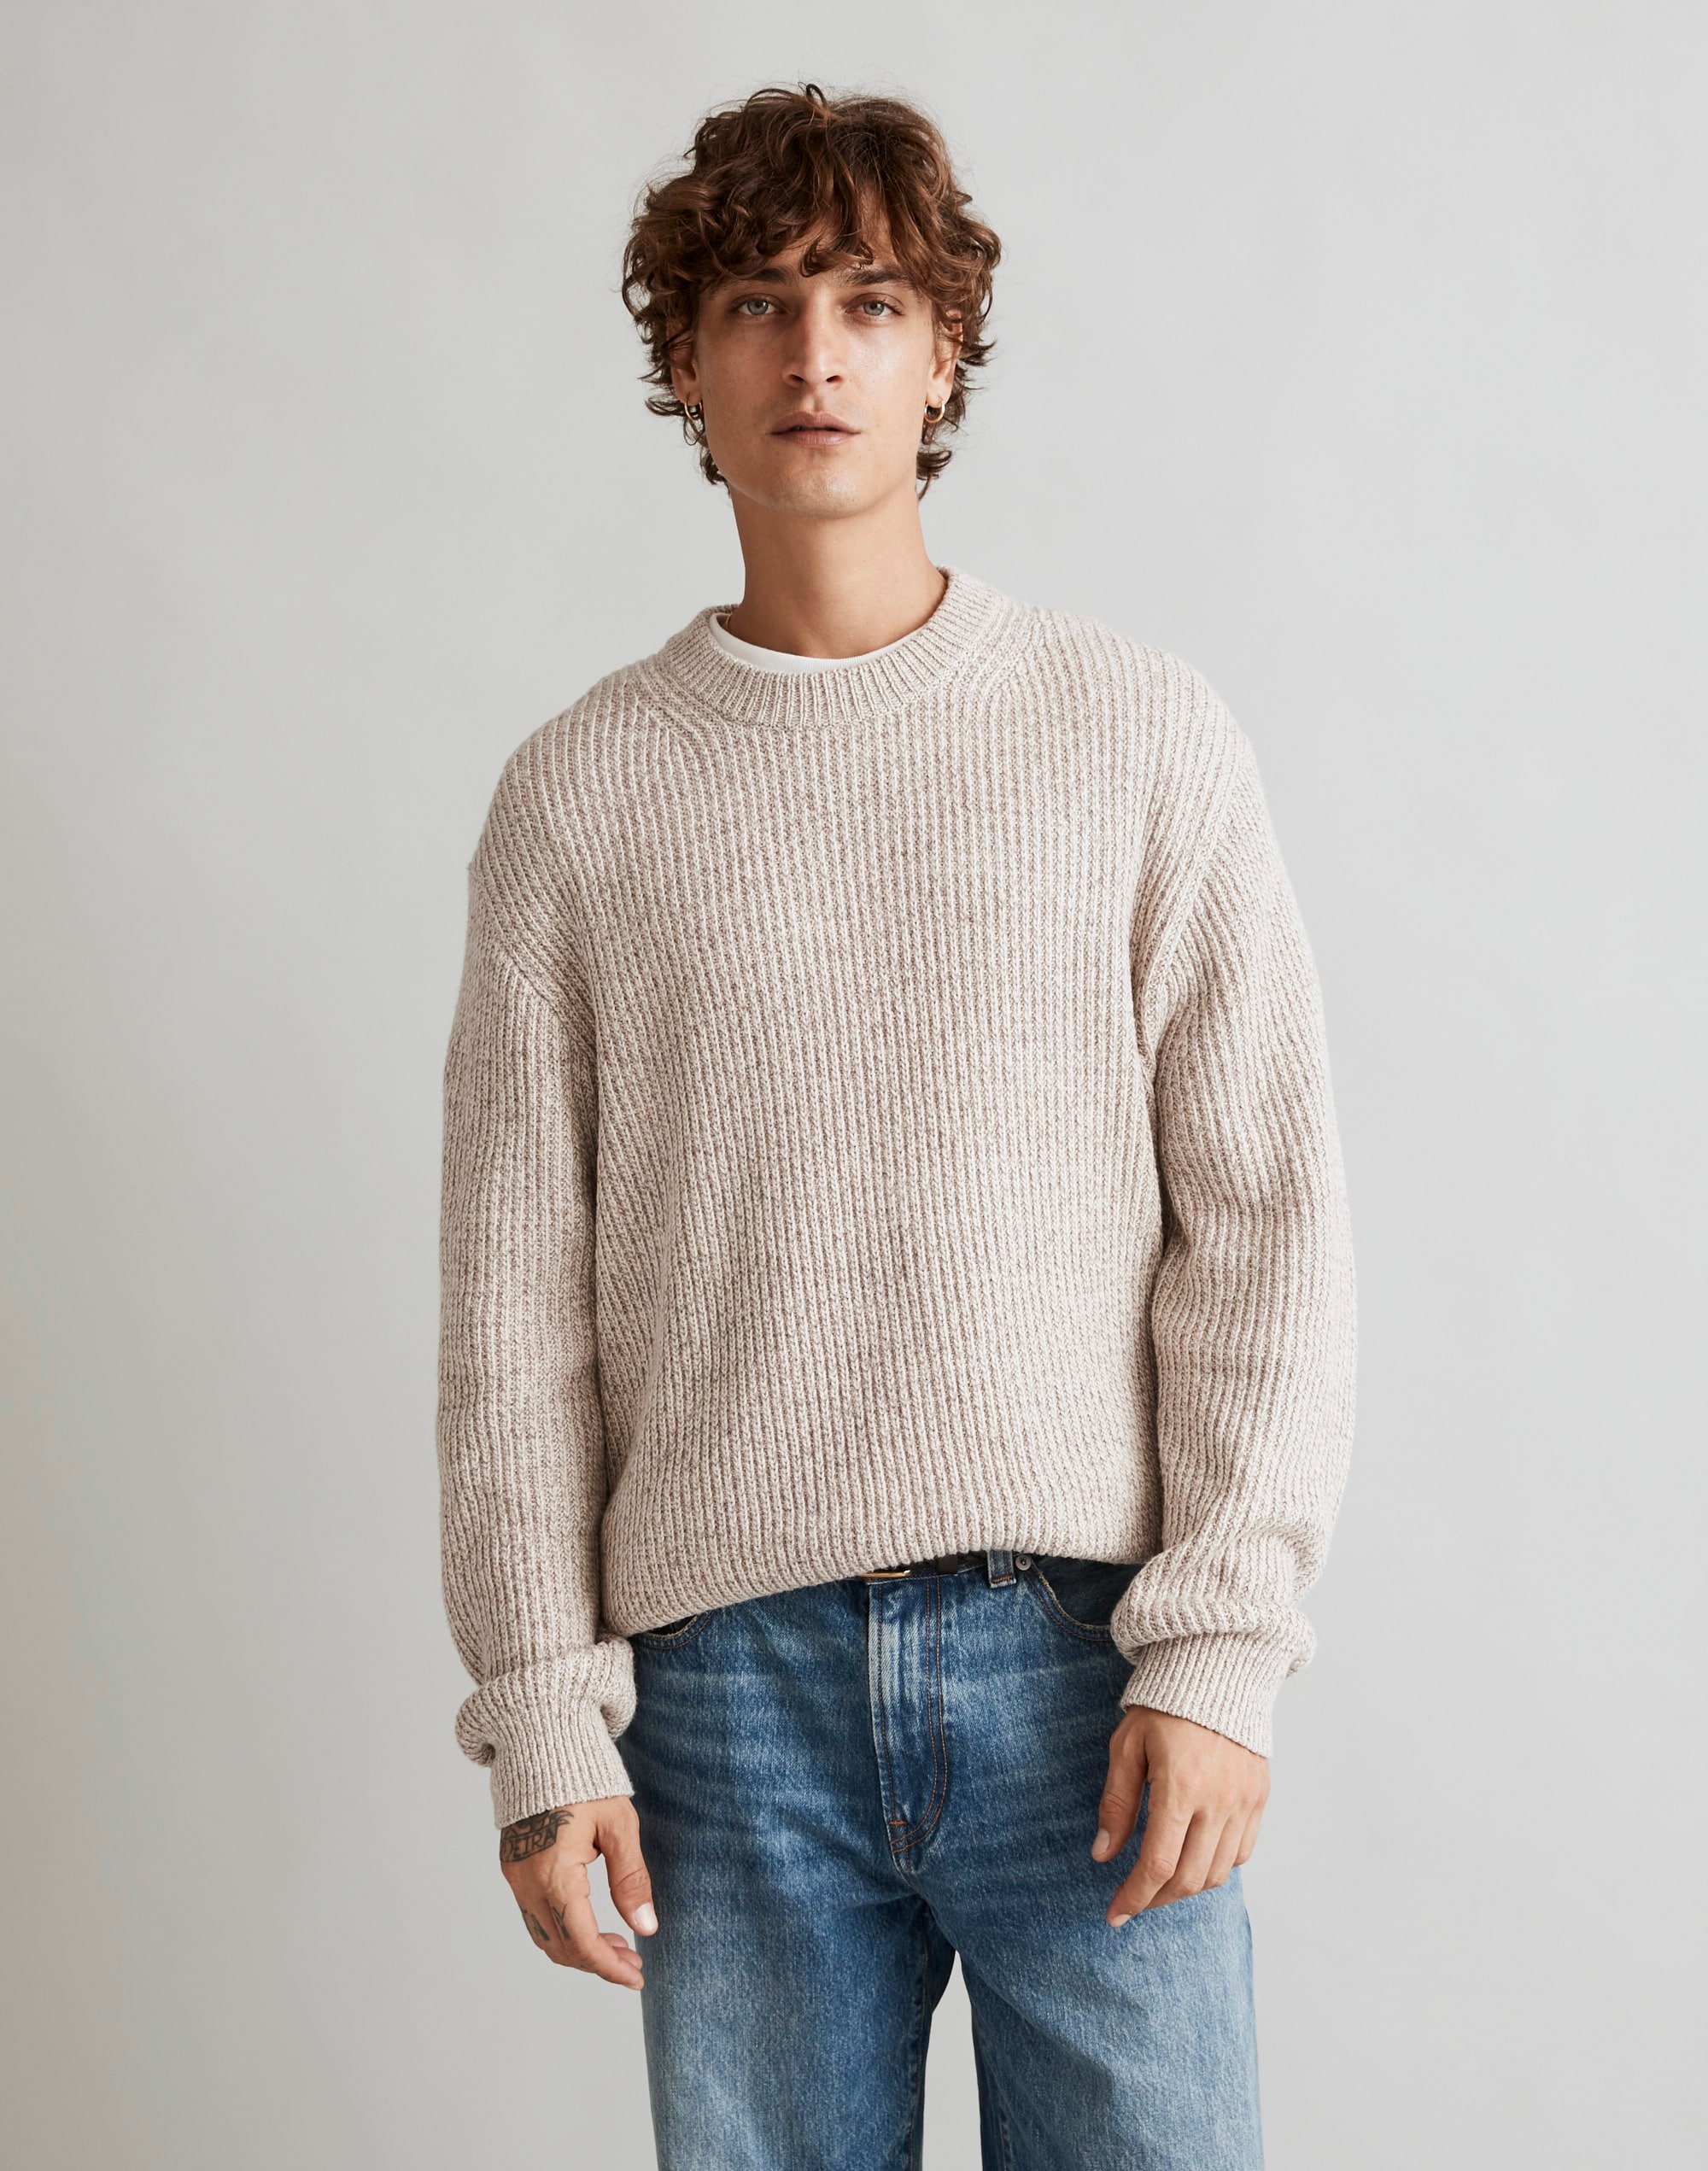 The Wyckoff Sweater | Madewell